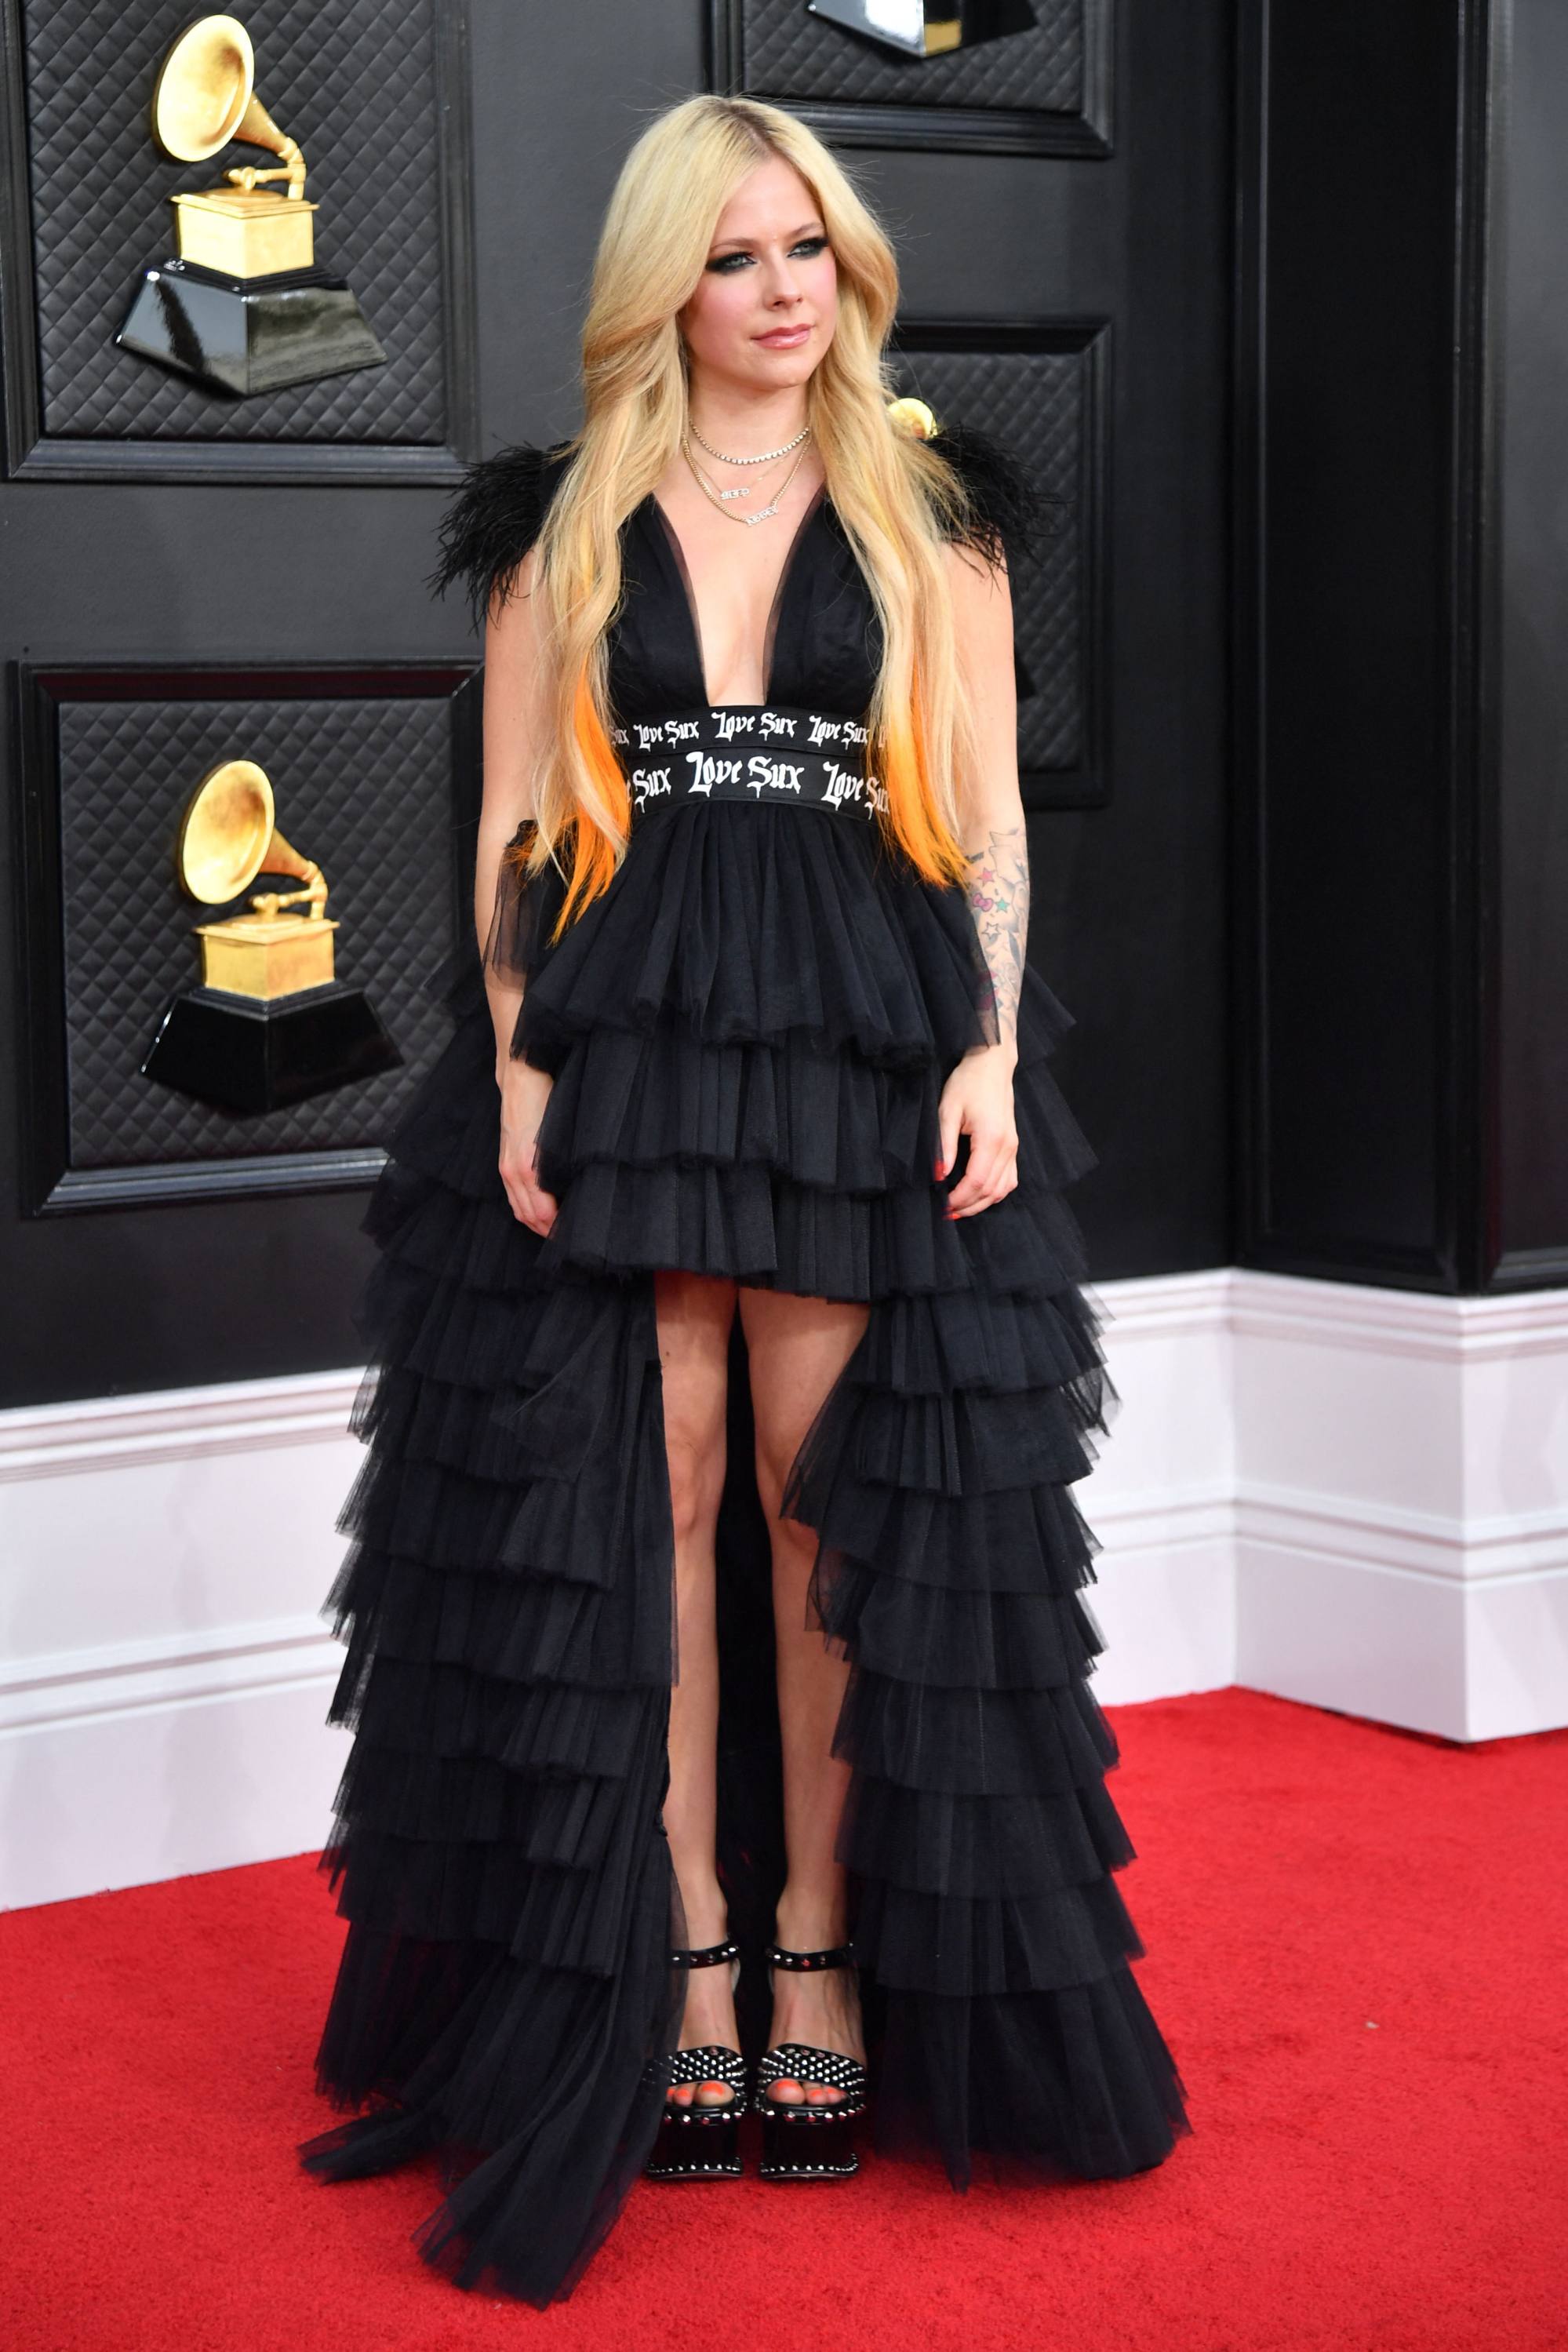 Canadian singer Avril Lavigne arrives for the 2022 Grammys, but we feel like it could have been the 2002 Grammys. Photo: AFP